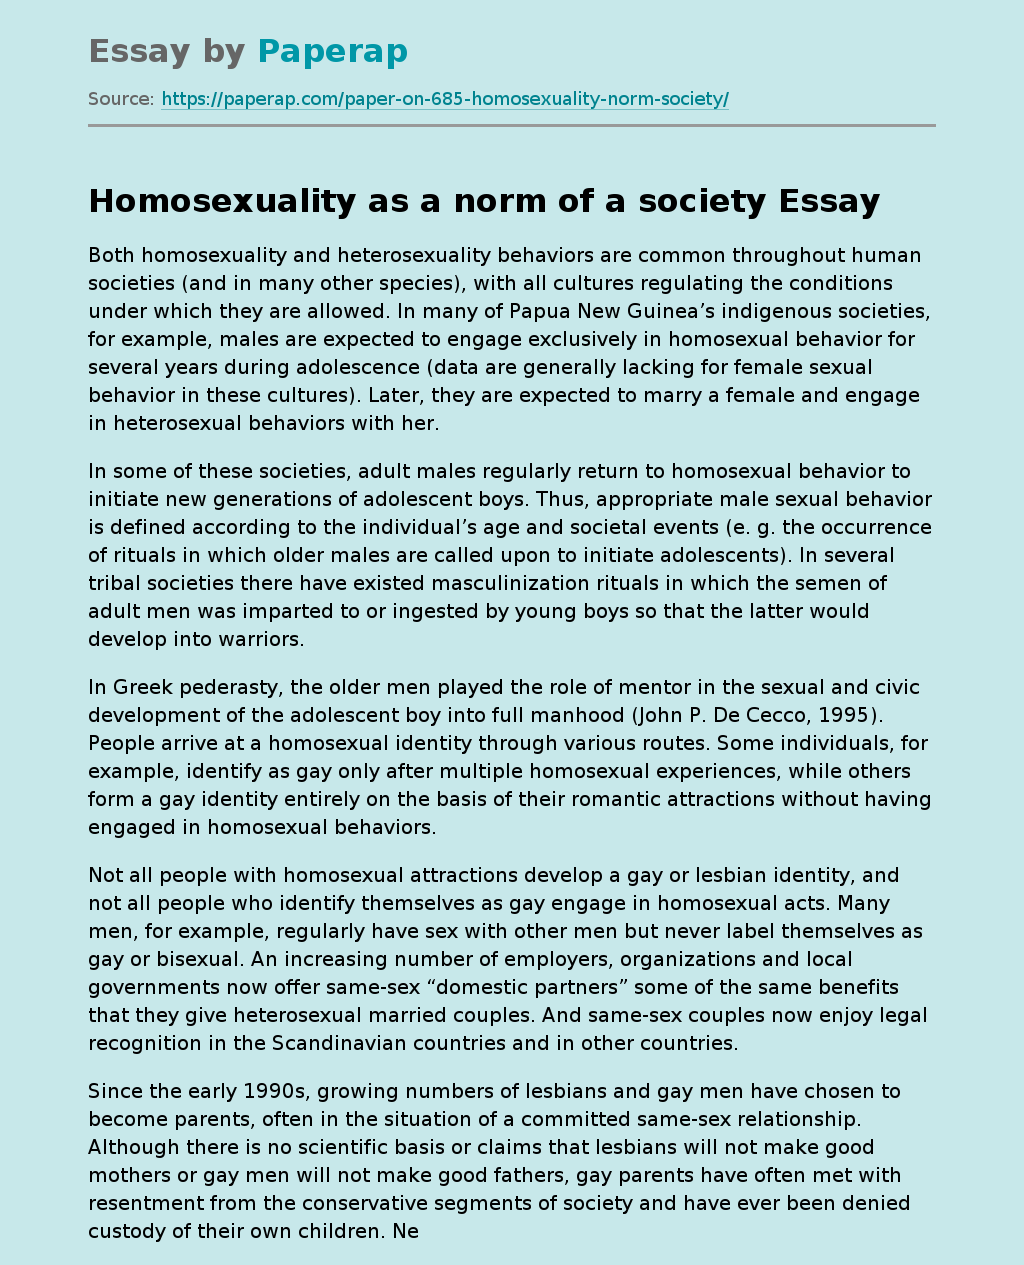 Homosexuality as a Norm of a Society